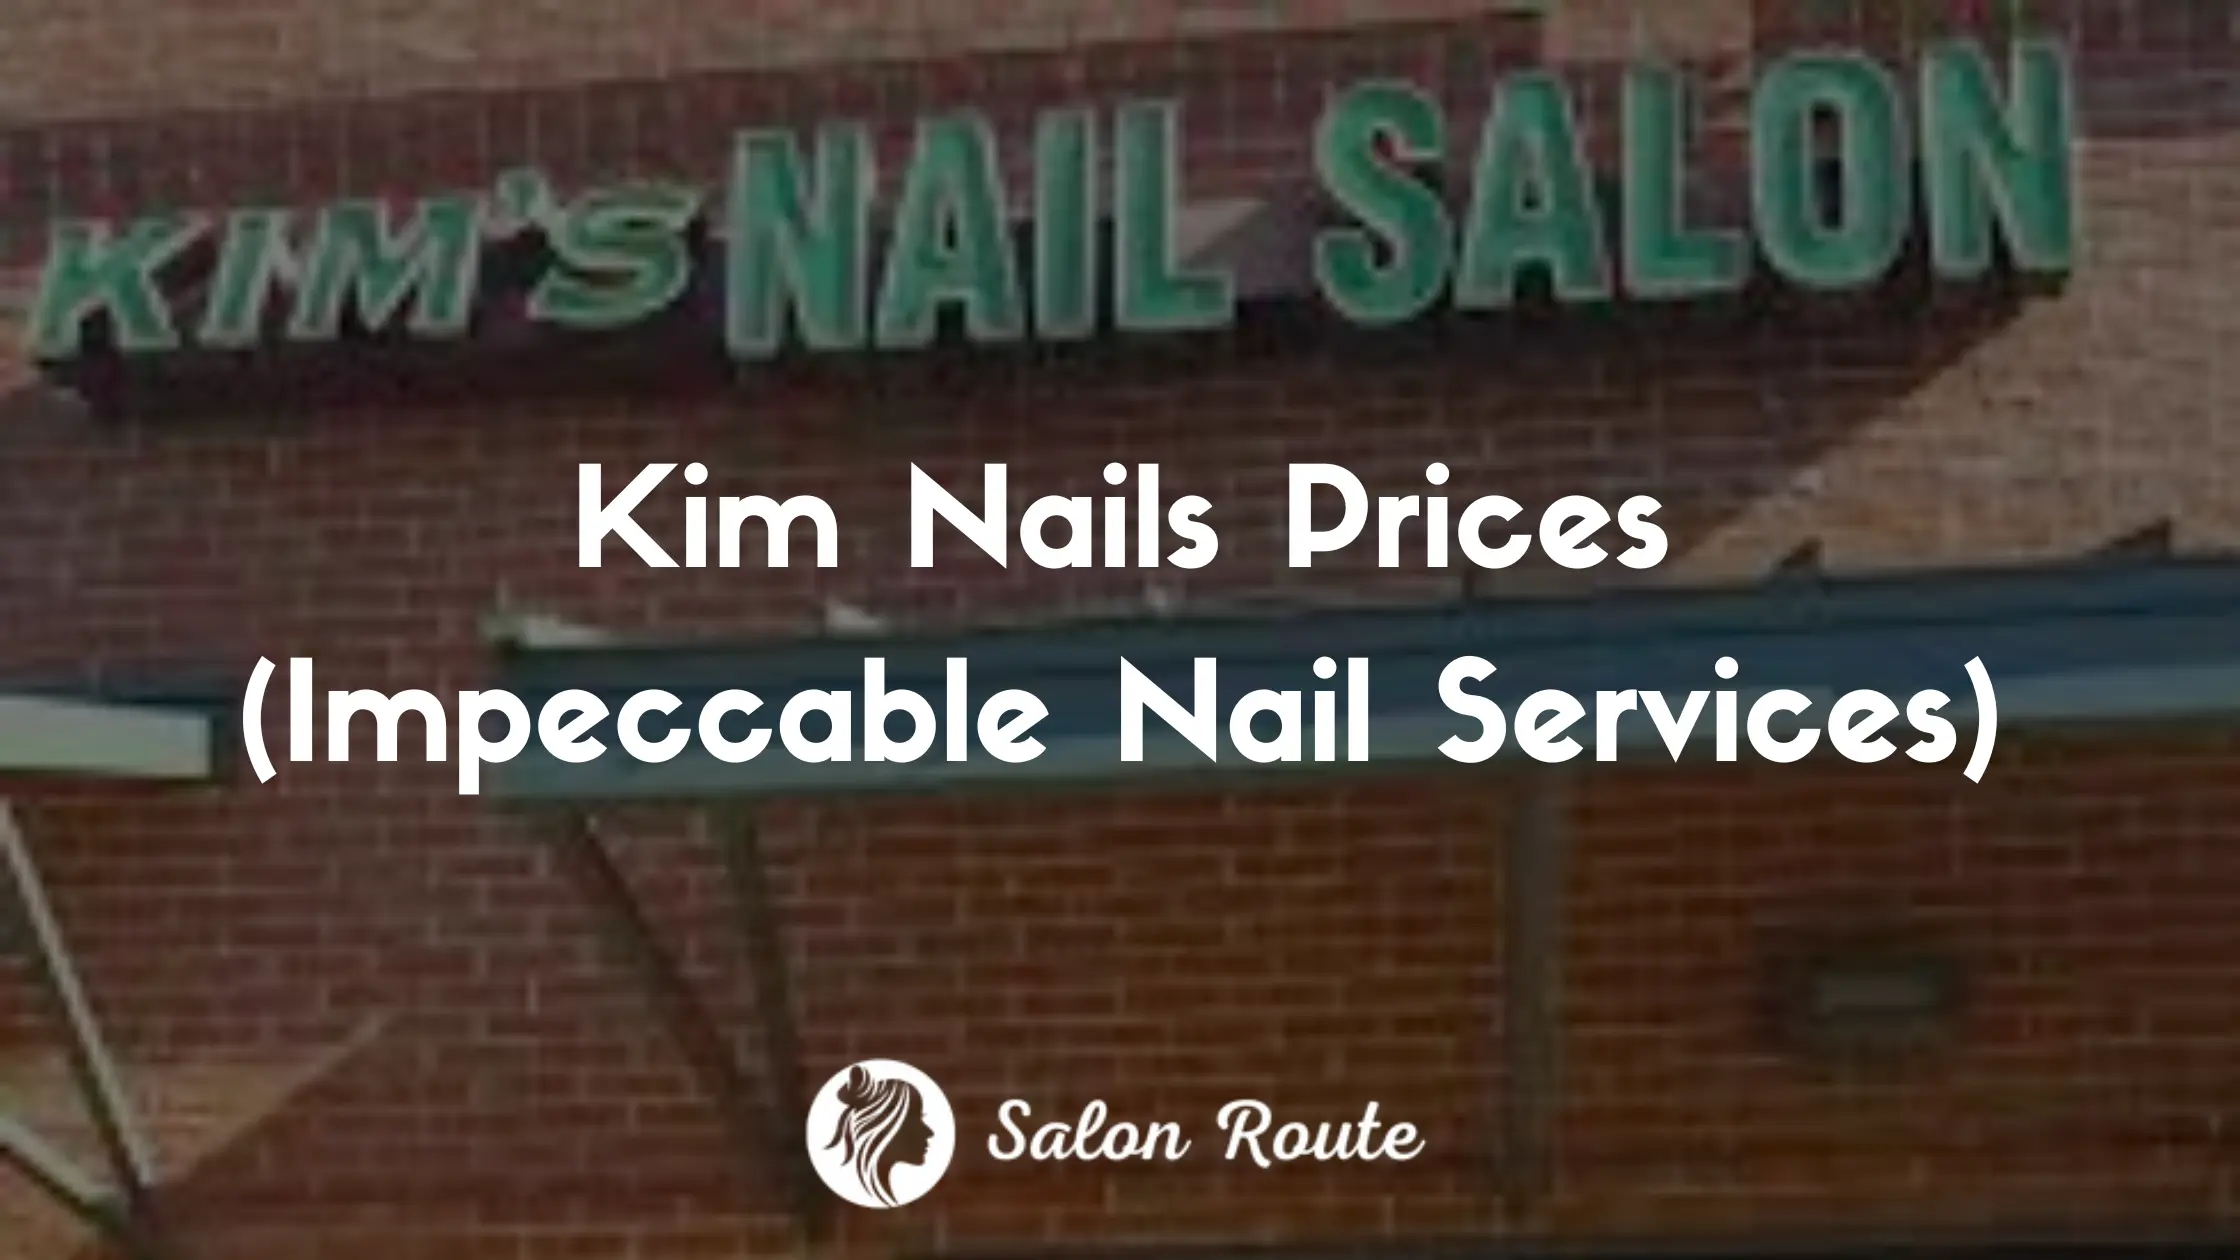 Kim Nails Prices (Impeccable Nail Services)